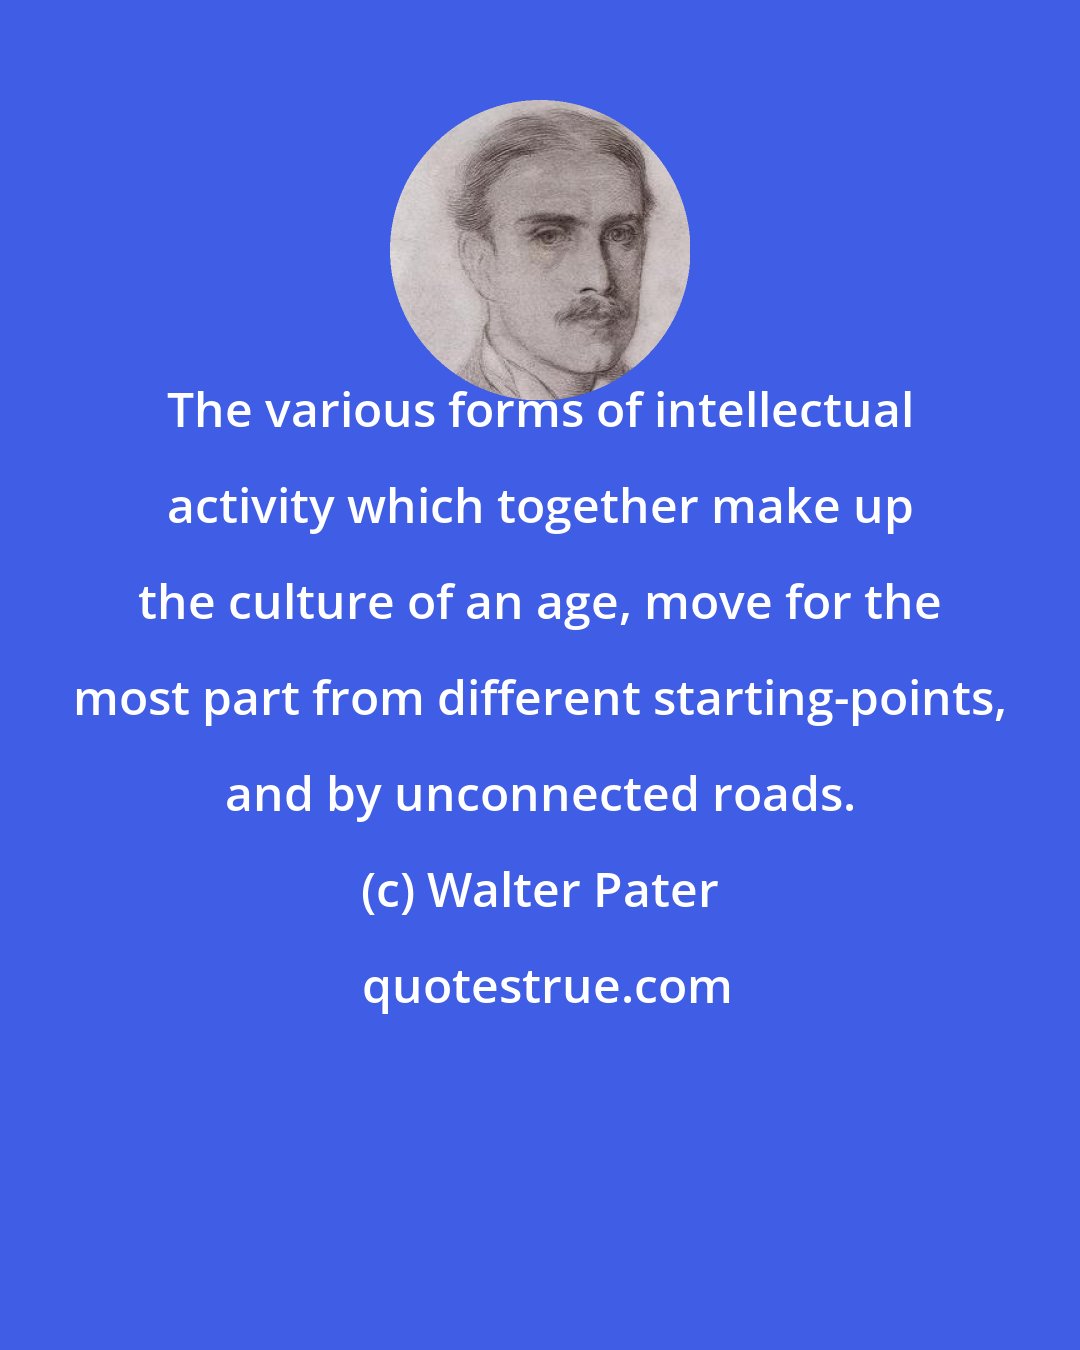 Walter Pater: The various forms of intellectual activity which together make up the culture of an age, move for the most part from different starting-points, and by unconnected roads.